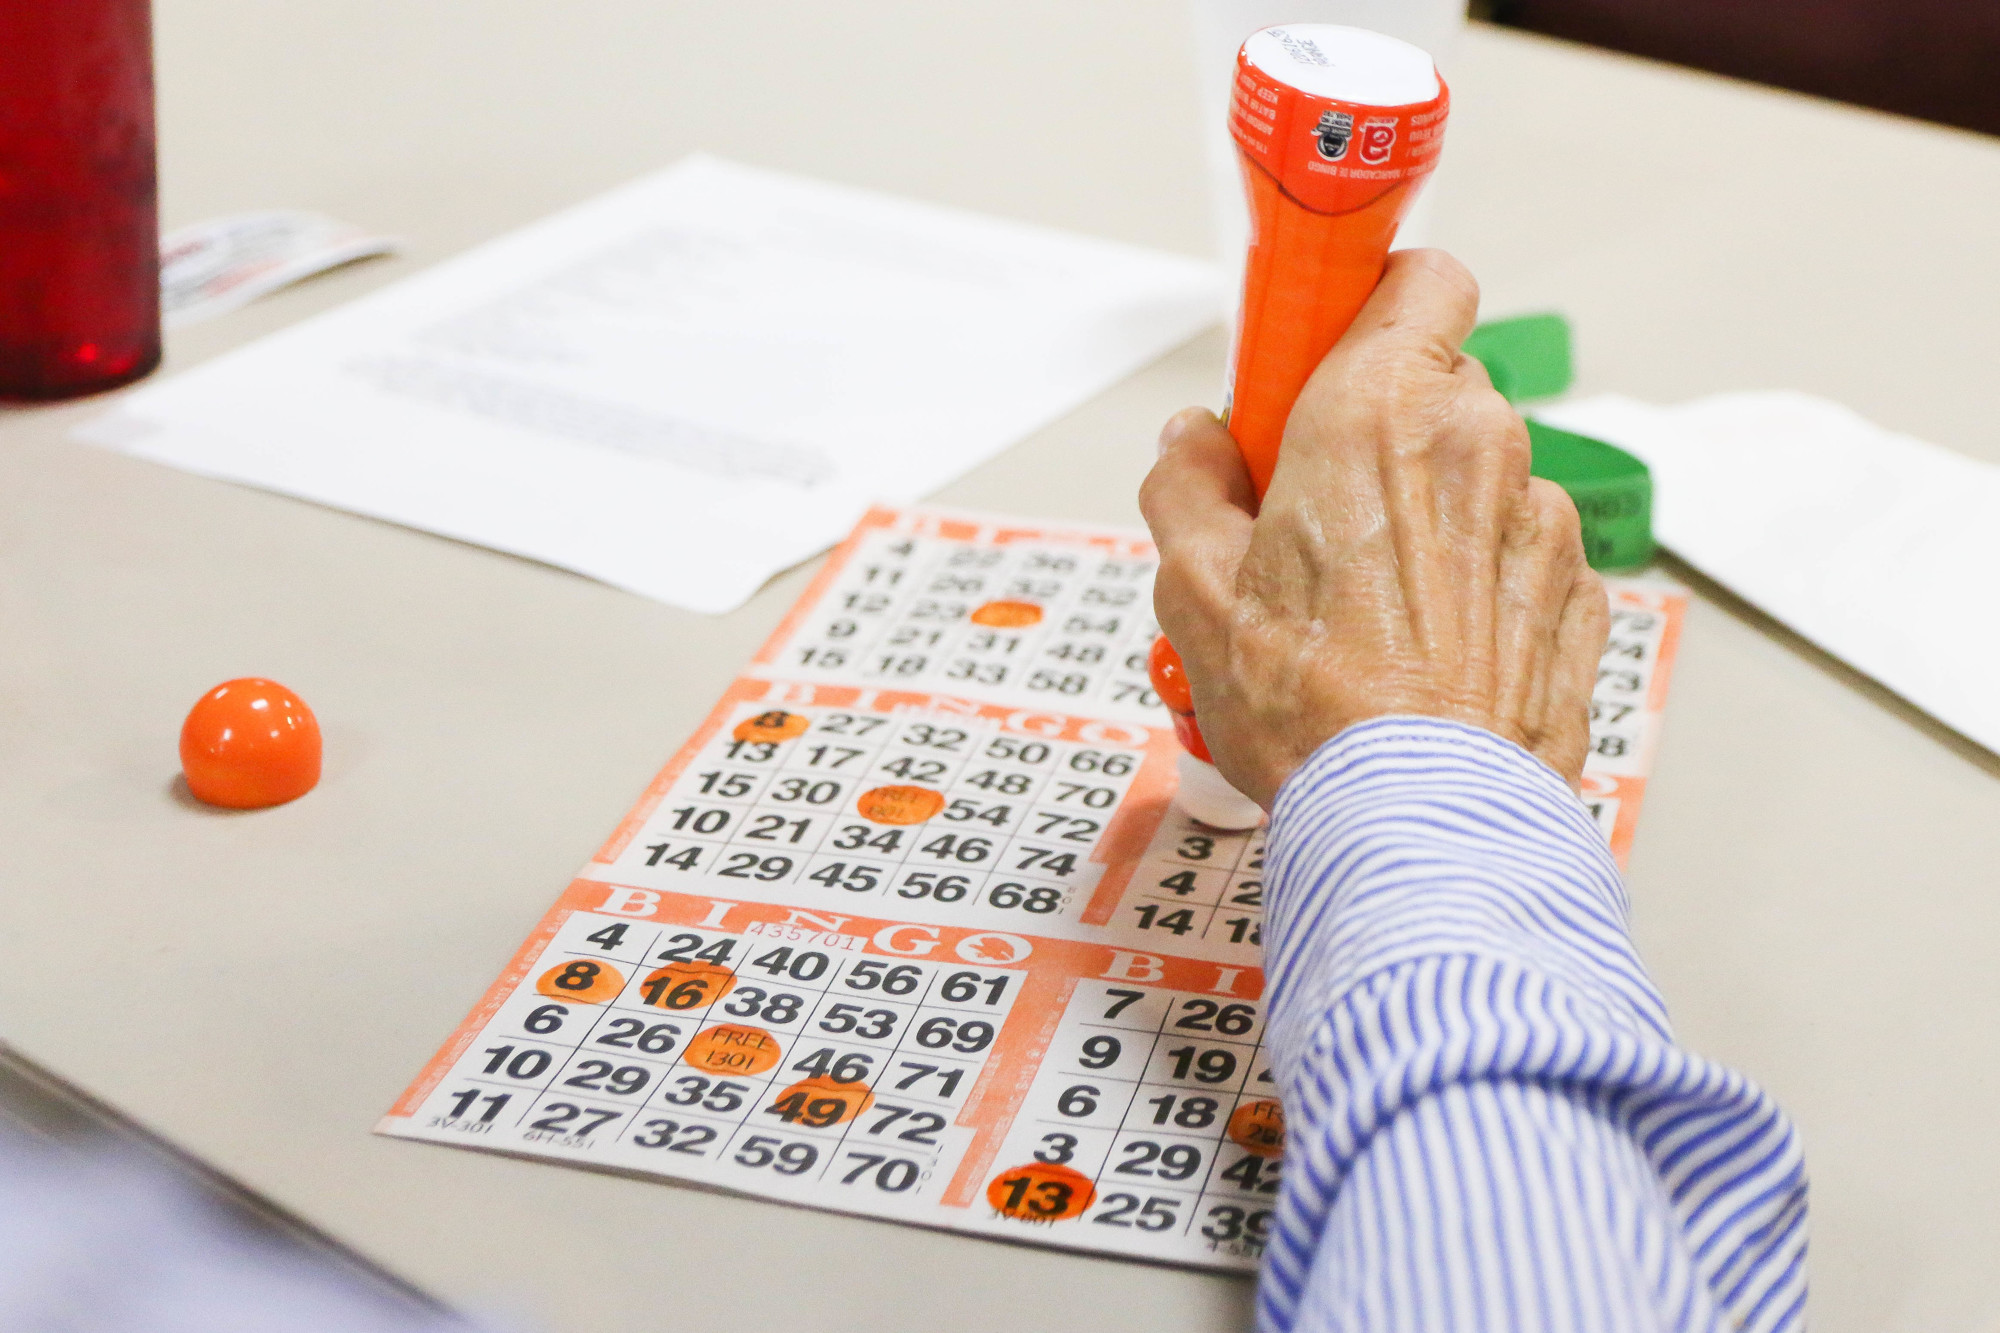 Palm Coast resident Anna Andrews plays bingo during a fundraiser for Special Olympics Flagler County held on Nov. 24. Photo by Paige Wilson